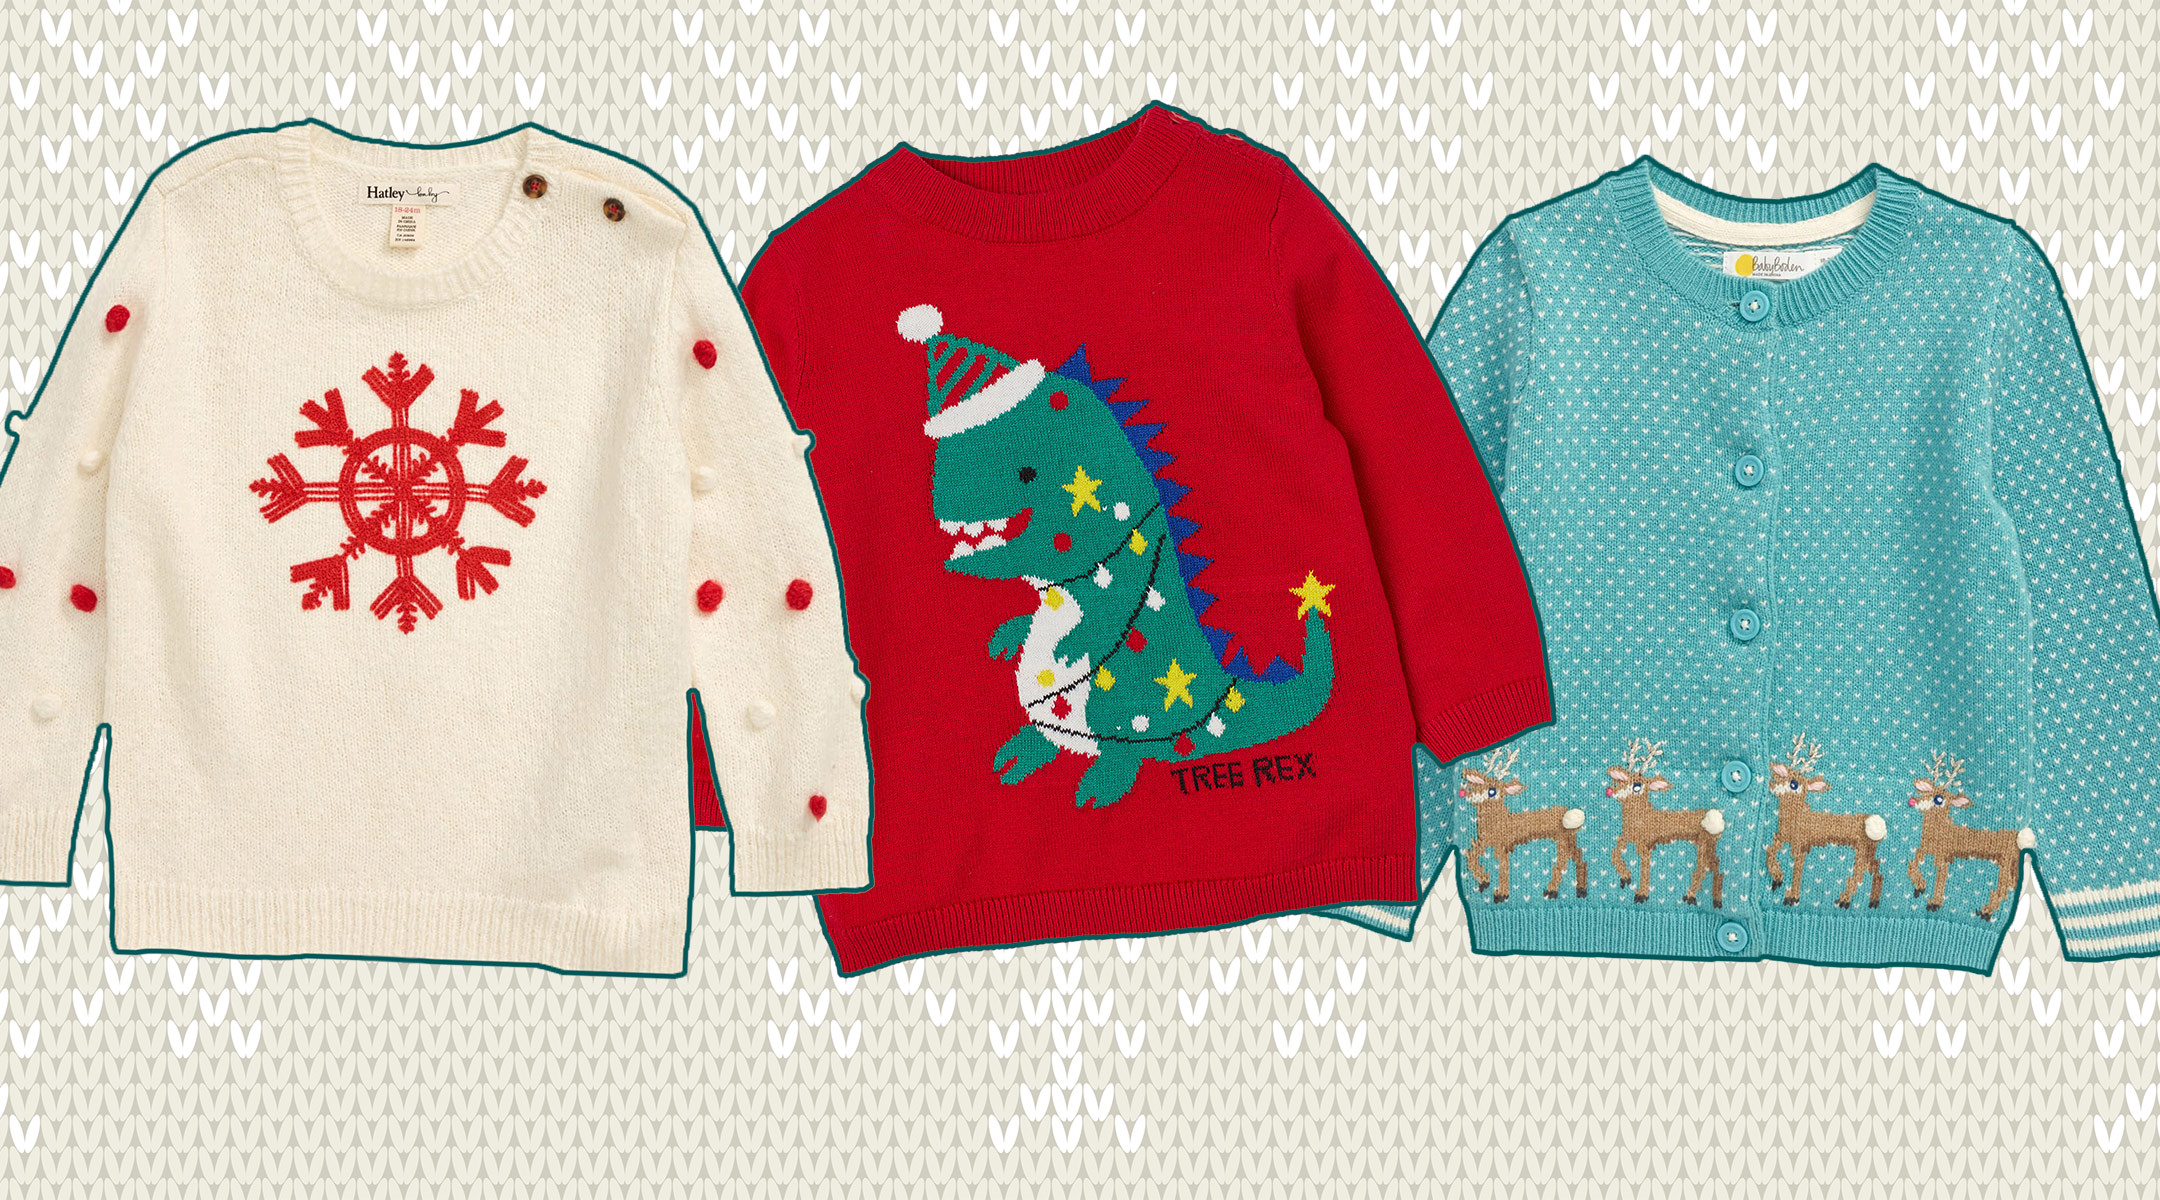 22 Best Ugly Christmas Sweaters - Homemade Ugly Christmas Sweaters